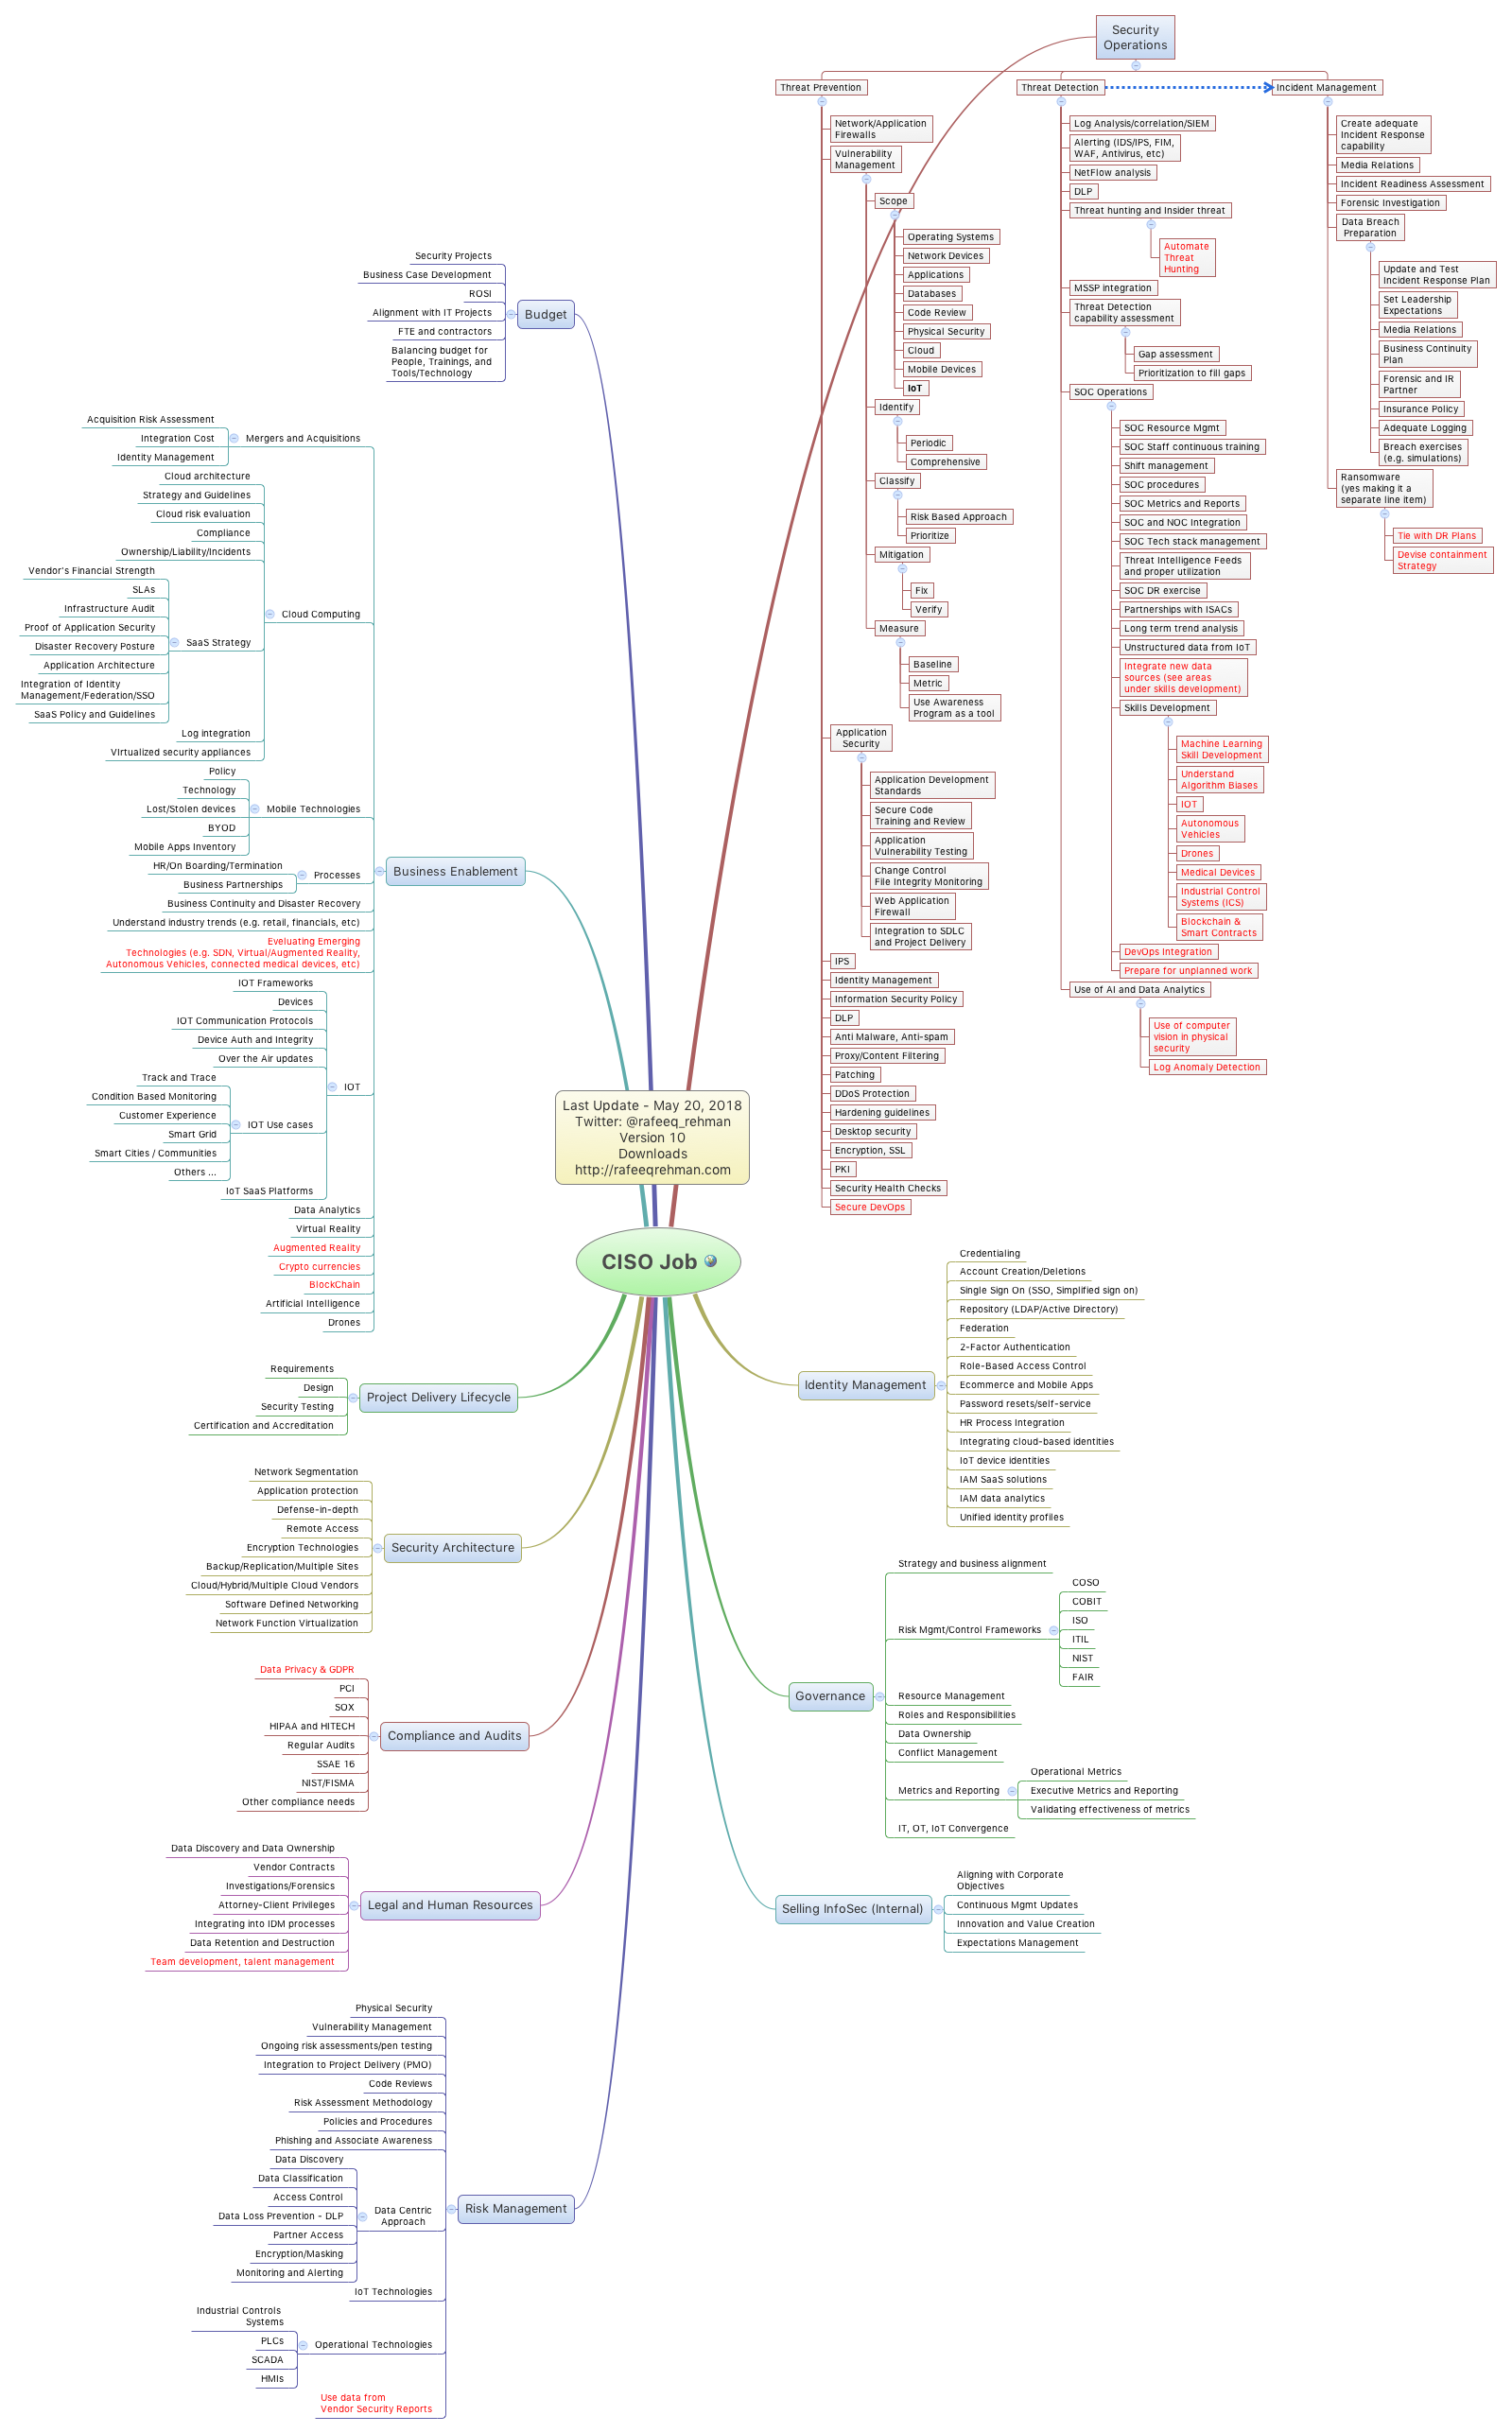 UPDATED Hypervisor Introspection Thwarts Web Memory Corruption Attack In The Wild CISO_MindMap_2018